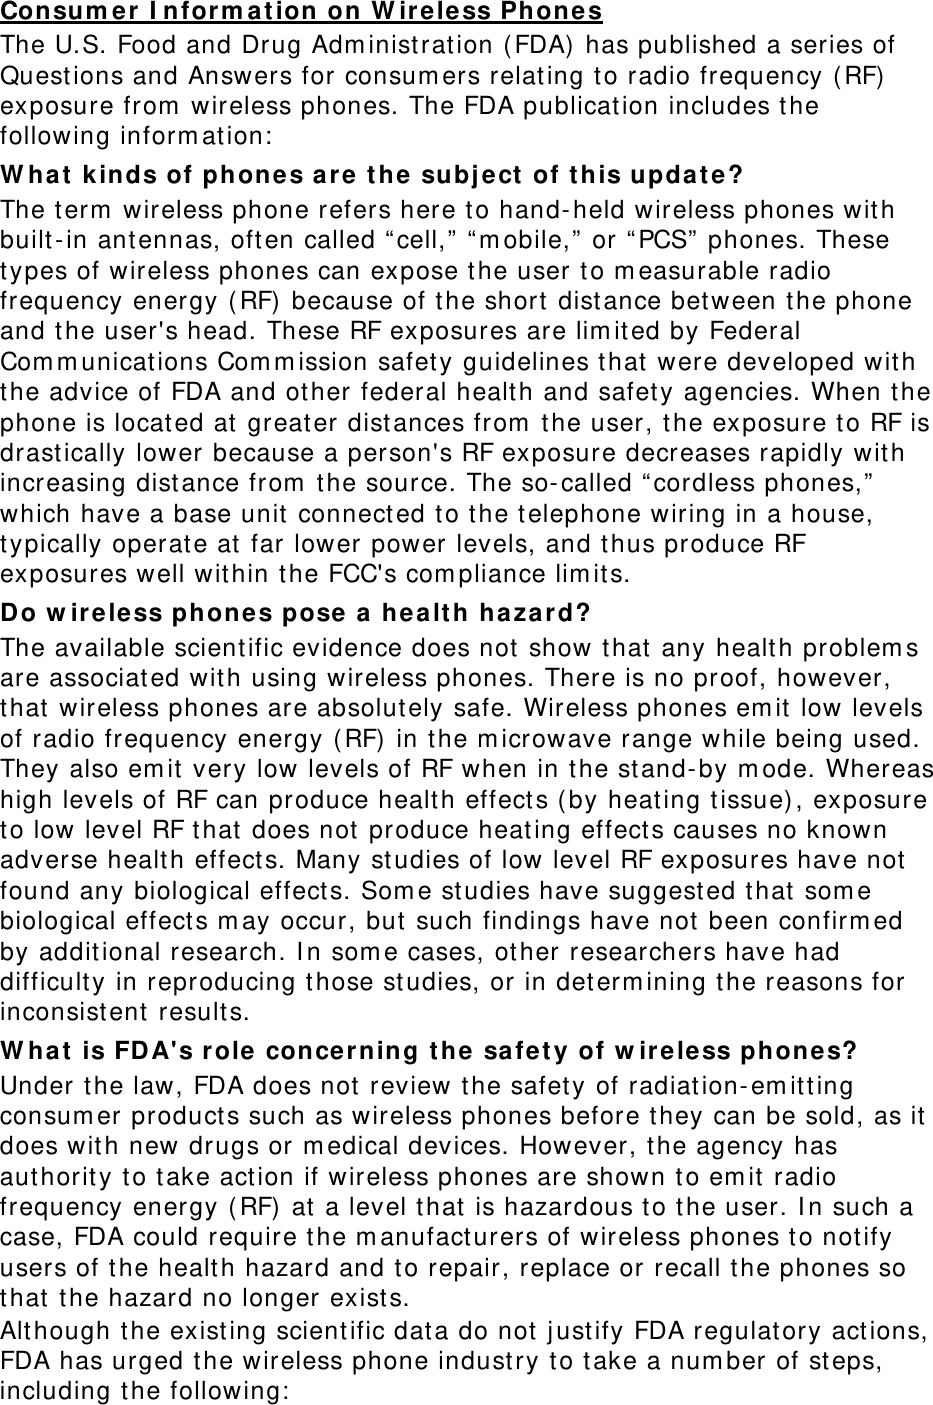 Consum er  I nform a t ion on W ir eless Phon es The U.S. Food and Drug Adm inist rat ion ( FDA) has published a series of Quest ions and Answers for consum ers relating t o radio frequency ( RF)  exposure from  wireless phones. The FDA publication includes t he following inform ation:  W hat kinds of phones a re t he  subj e ct  of t h is updat e? The t erm  wireless phone refers here t o hand- held wireless phones with built-in ant ennas, often called “ cell,”  “ m obile,”  or “ PCS”  phones. These types of wireless phones can expose t he user to m easurable radio frequency energy ( RF)  because of the short  distance bet ween t he phone and t he user&apos;s head. These RF exposures are lim it ed by Federal Com m unicat ions Com m ission safet y guidelines t hat were developed with the advice of FDA and ot her federal health and safet y agencies. When t he phone is located at greater dist ances from  the user, t he exposure to RF is drast ically lower because a person&apos;s RF exposure decreases rapidly wit h increasing distance from  the source. The so- called “ cordless phones,”  which have a base unit connected to the telephone wiring in a house, typically operate at far lower power levels, and t hus produce RF exposures well wit hin t he FCC&apos;s com pliance lim its. Do w ireless phon es pose a  he a lt h ha za rd? The available scient ific evidence does not  show t hat any health problem s are associat ed with using wireless phones. There is no proof, however, that wireless phones are absolutely safe. Wireless phones em it low levels of radio frequency energy ( RF)  in the m icrowave range while being used. They also em it very low levels of RF when in the stand- by m ode. Whereas high levels of RF can produce health effect s ( by heating t issue), exposure to low level RF that does not produce heat ing effect s causes no known adverse health effect s. Many st udies of low level RF exposures have not  found any biological effect s. Som e studies have suggest ed t hat  som e biological effect s m ay occur, but such findings have not been confirm ed by additional research. I n som e cases, ot her researchers have had difficulty in reproducing t hose studies, or in determ ining t he reasons for inconsistent results. W hat is FDA&apos;s r ole concerning t he  sa fe t y of w ireless phon es? Under the law, FDA does not review the safet y of radiat ion- em itting consum er product s such as wireless phones before they can be sold, as it does wit h new drugs or m edical devices. However, the agency has aut hority t o t ake action if wireless phones are shown t o em it  radio frequency energy ( RF)  at a level that is hazardous t o t he user. I n such a case, FDA could require the m anufact urers of wireless phones t o notify users of the health hazard and t o repair, replace or recall t he phones so that t he hazard no longer exist s. Alt hough the existing scient ific data do not j ust ify FDA regulat ory act ions, FDA has urged t he wireless phone indust ry to t ake a num ber of st eps, including t he following:  